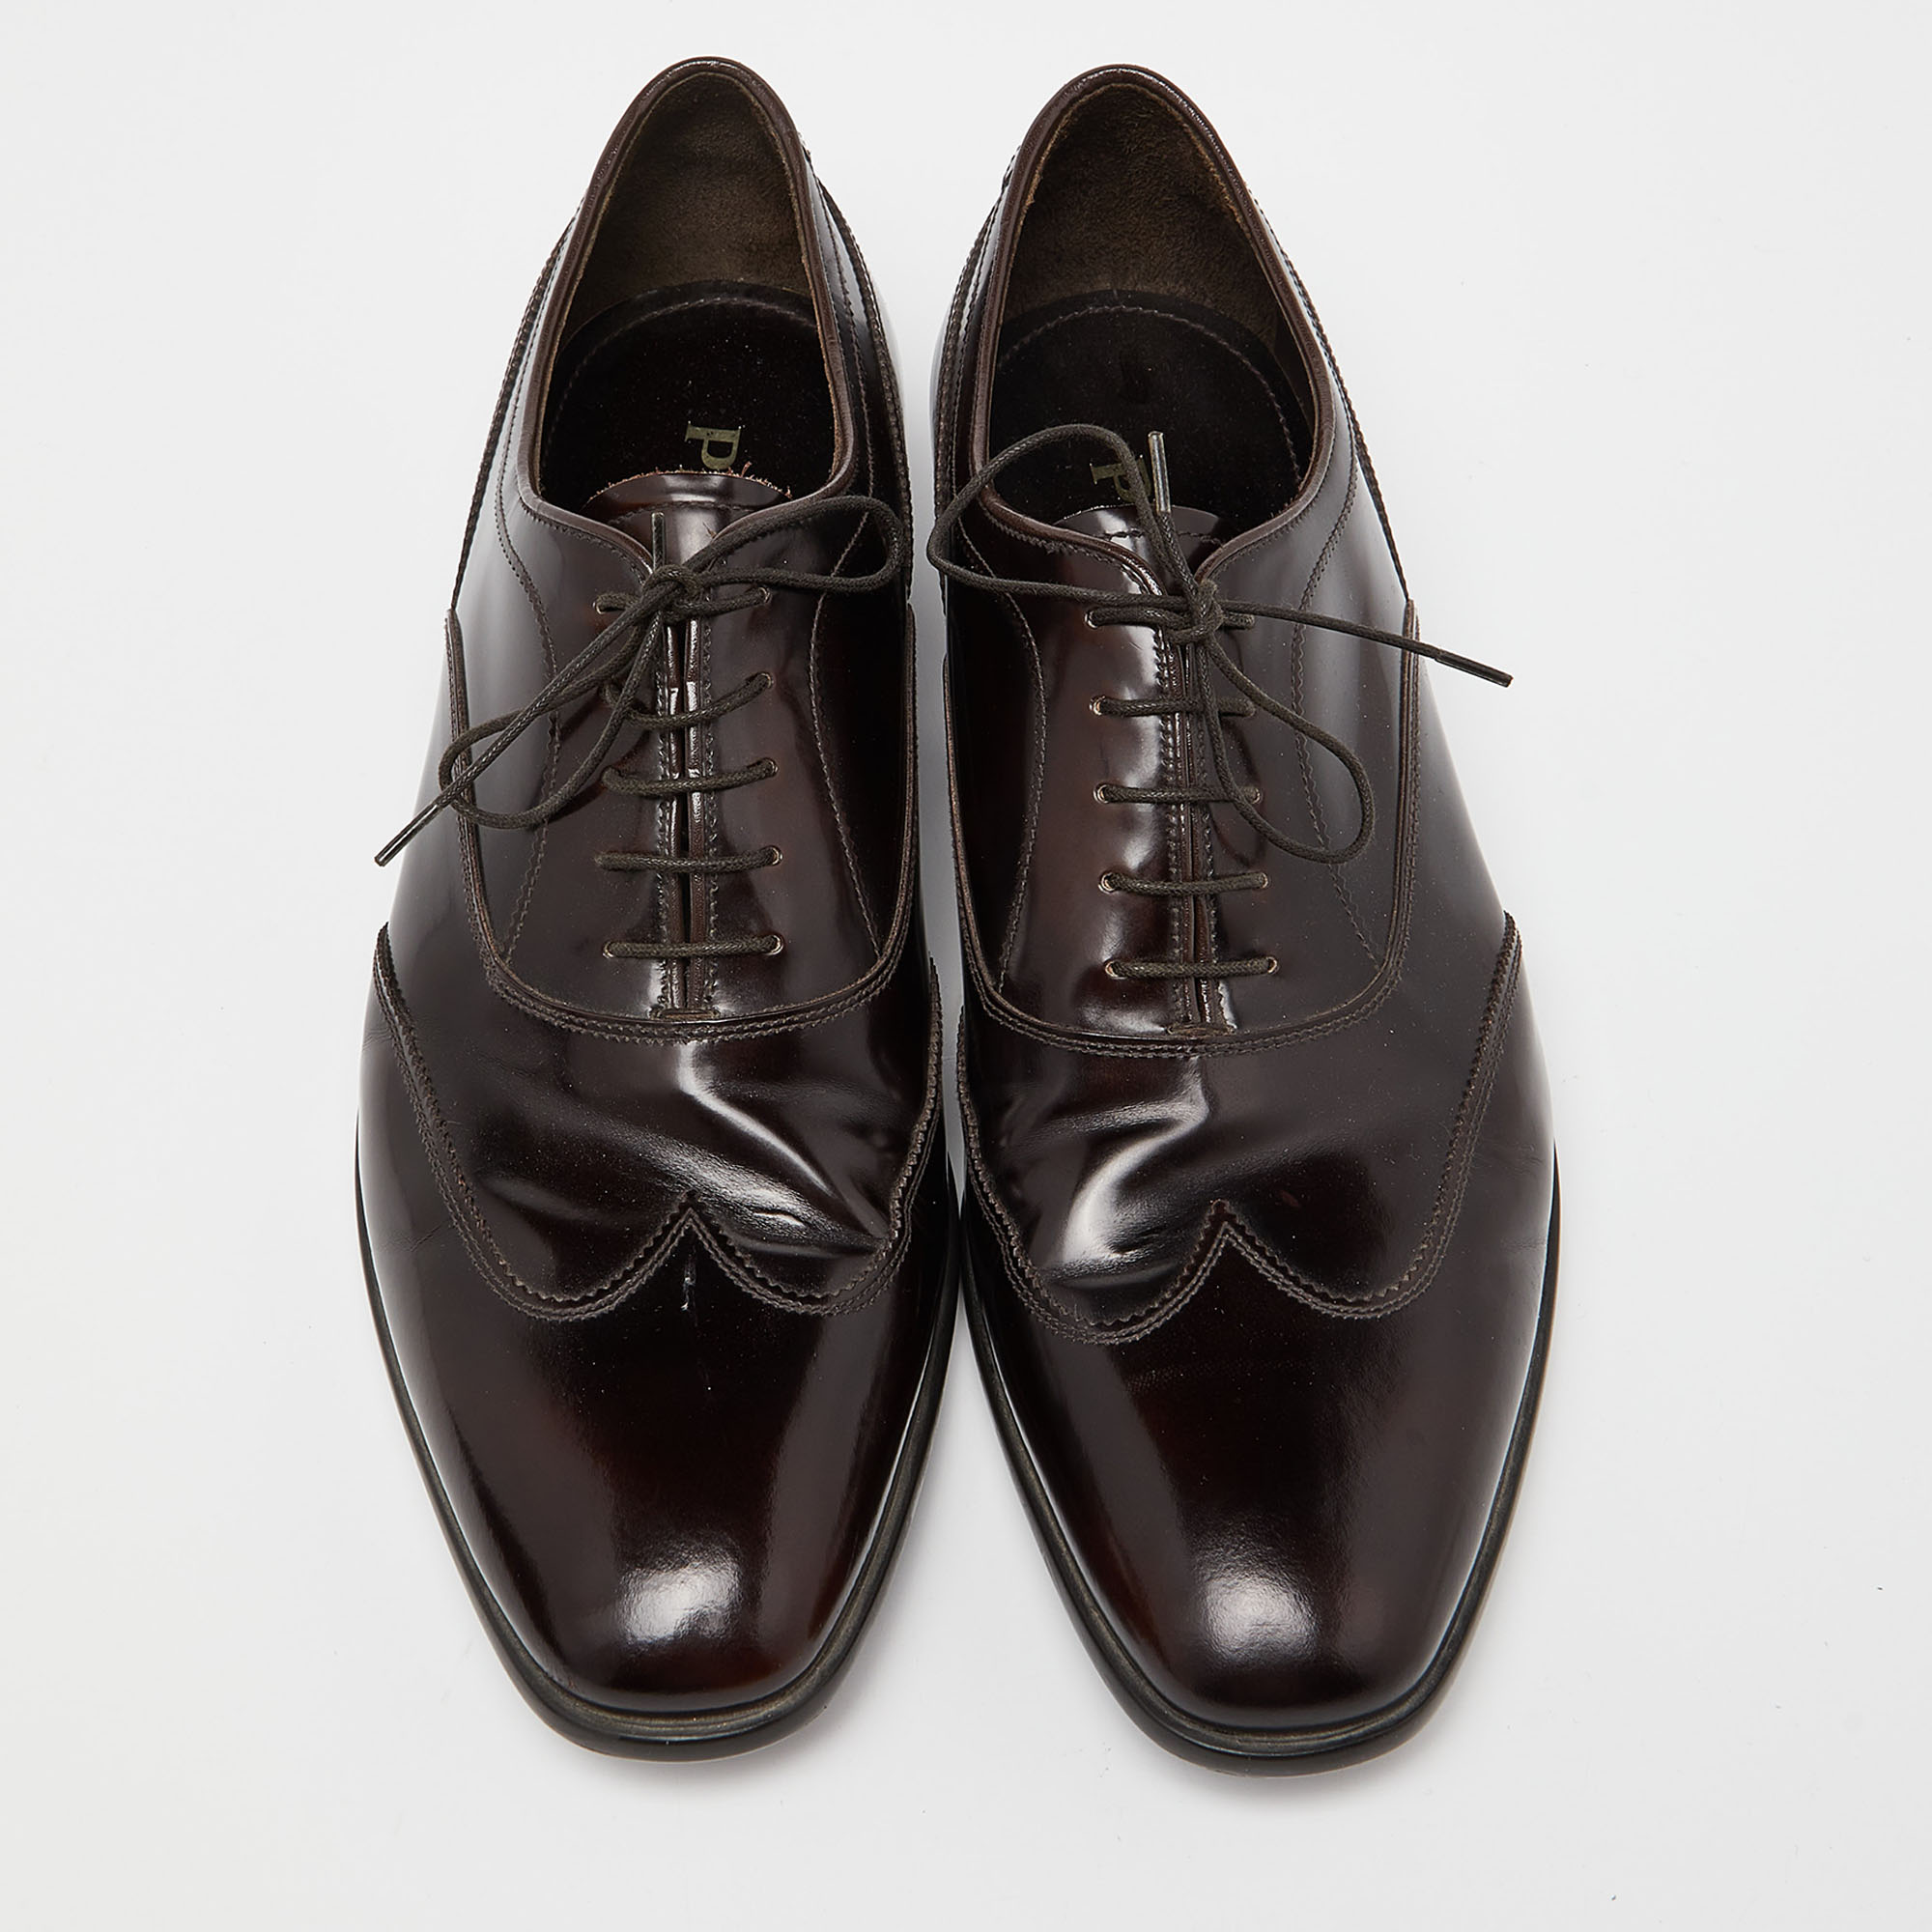 Prada Brown Patent Leather Lace Up Oxfords Size 43.5